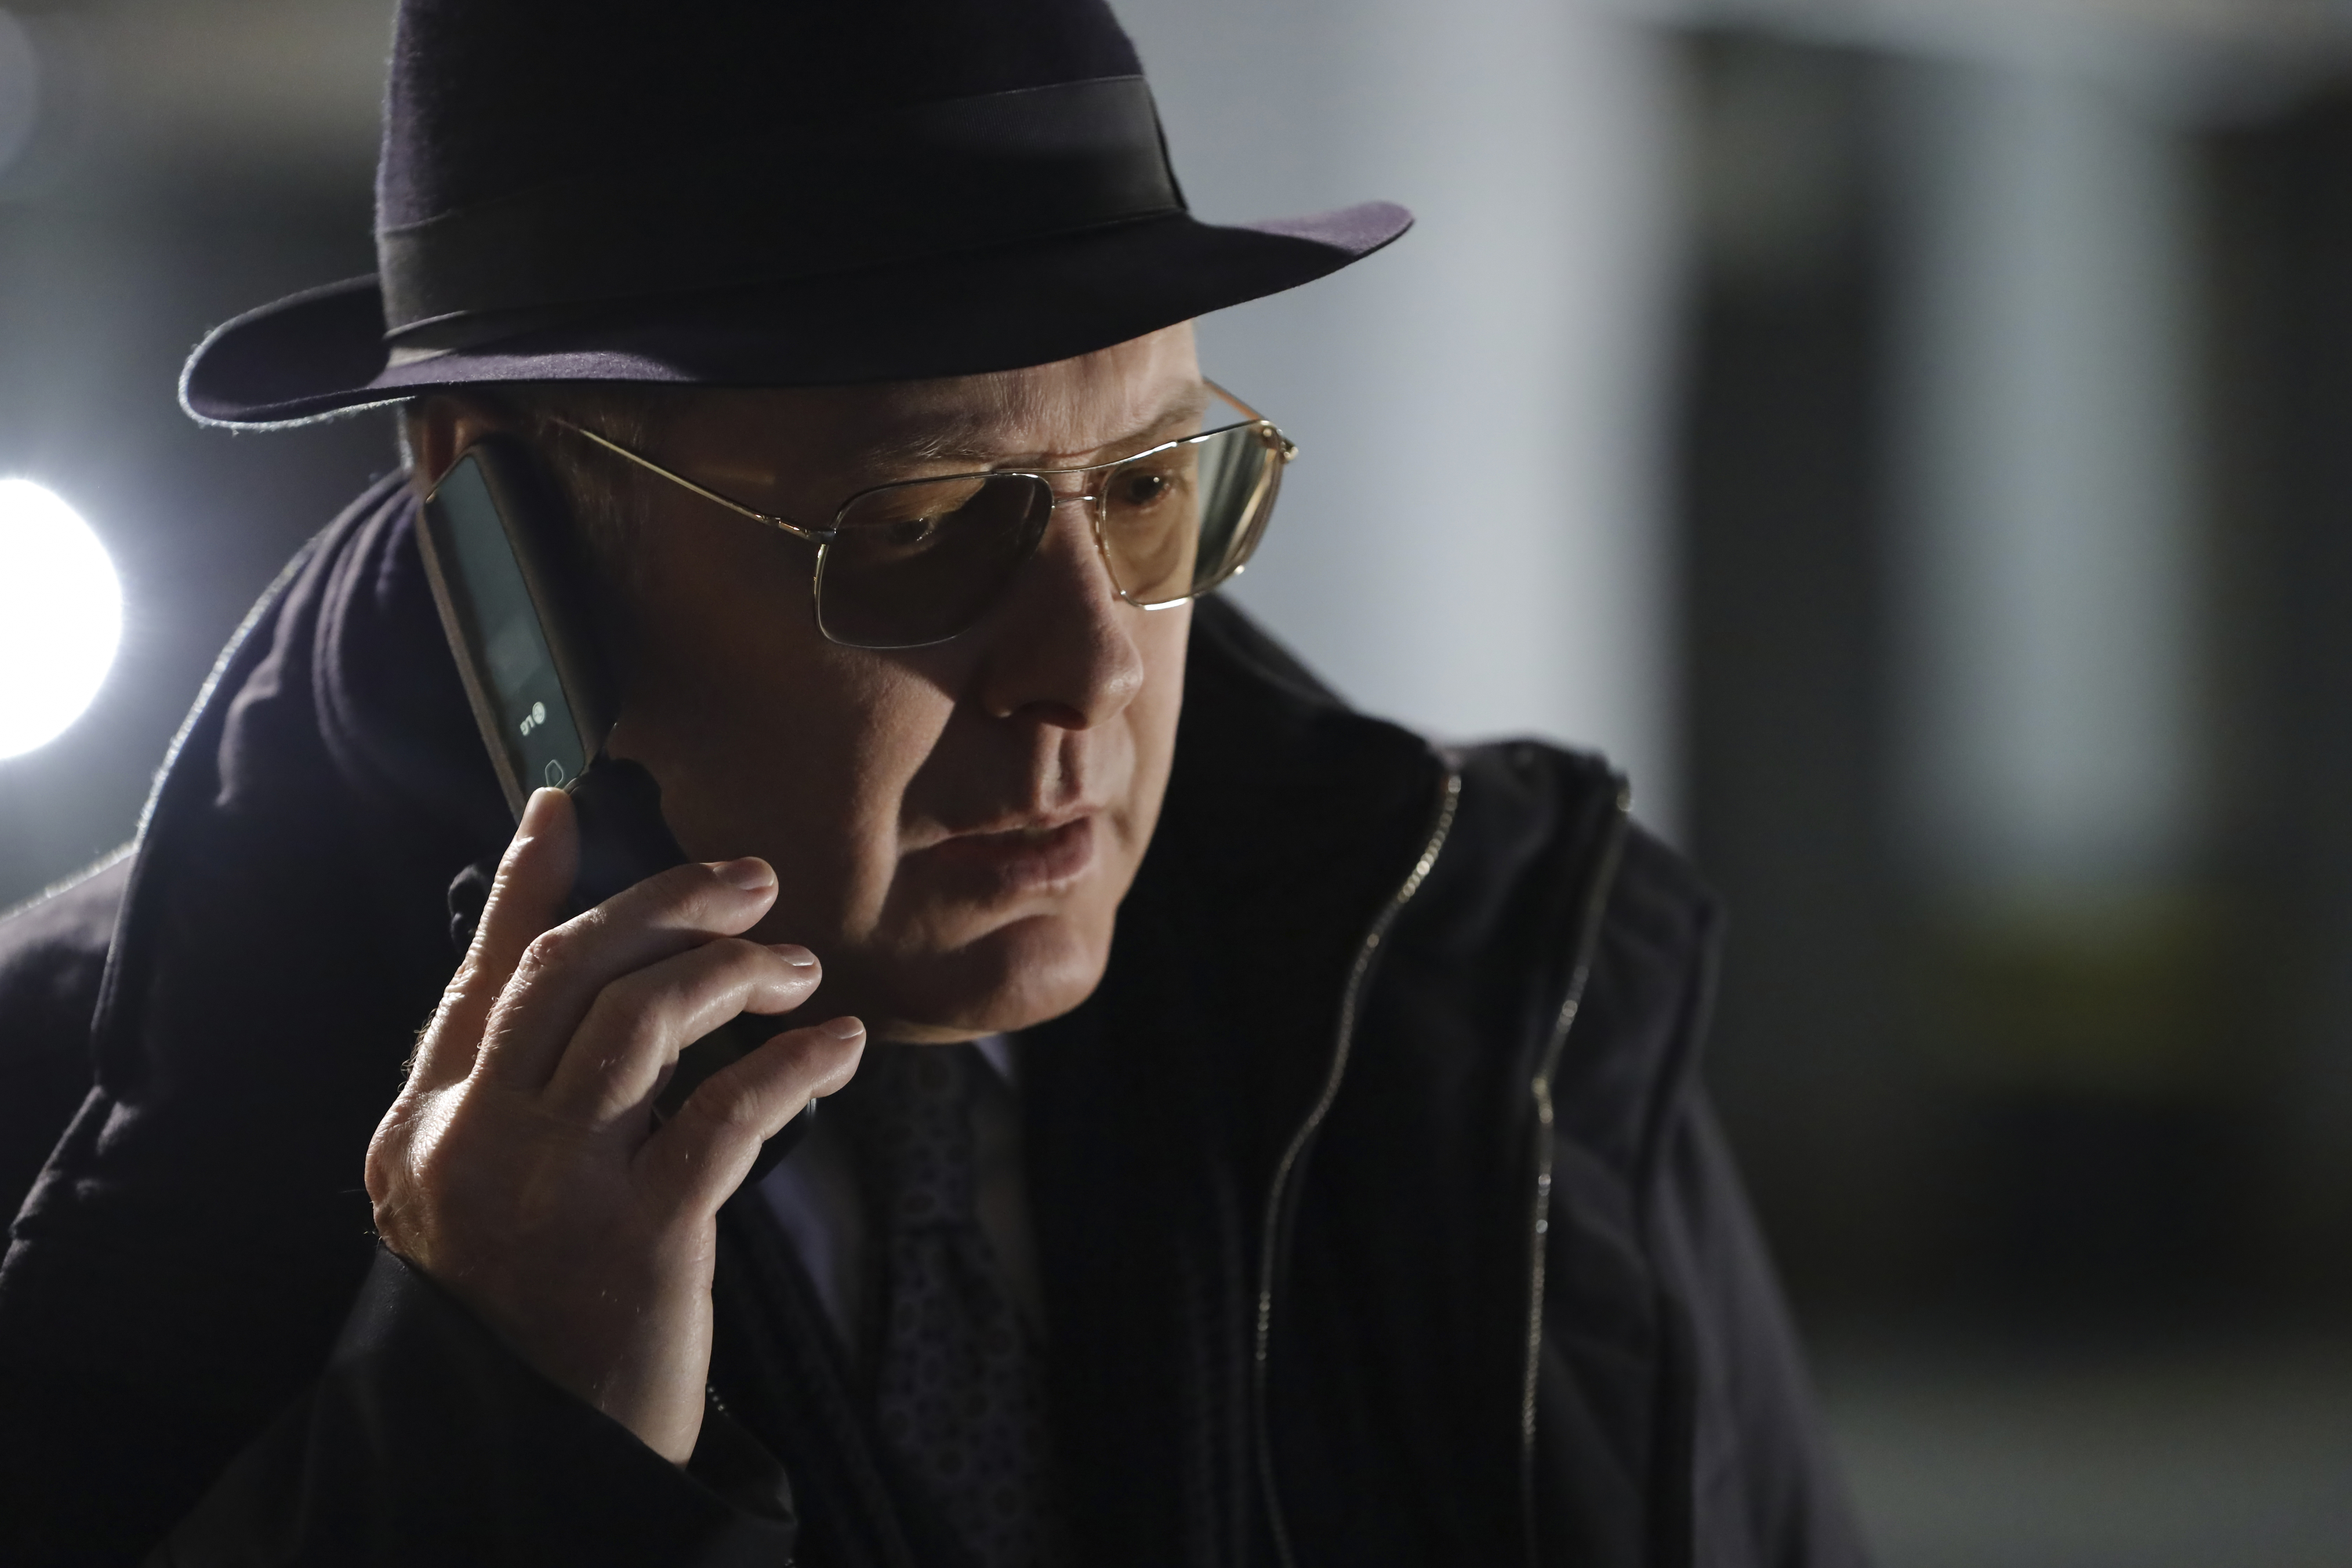 'The Blacklist' star James Spader, in character as Red, subject of the Redarina fan theory, wears a black winter jacket over a suit and tie, and a pair of tinted glasses and a black hat. He holds his flip phone to his ear.